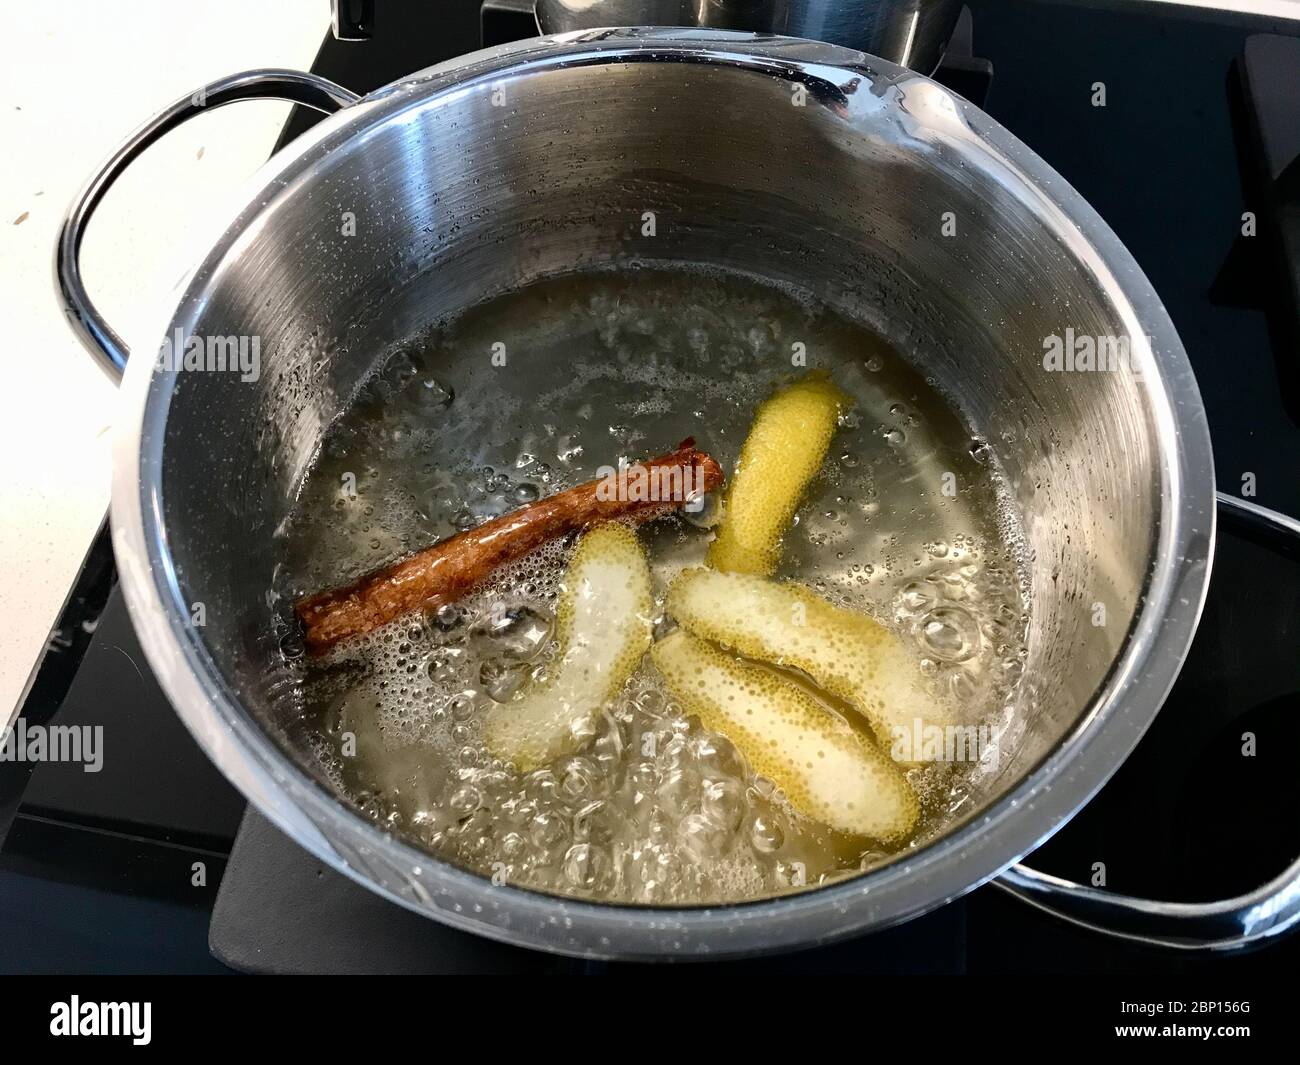 Making Sherbet with Cinnamon Stick, Lemon Peel and Water in Pot for Pasteis de Nata or Belem Tart. Portuguese Custard made with Egg, Cinnamon, Sugar a Stock Photo